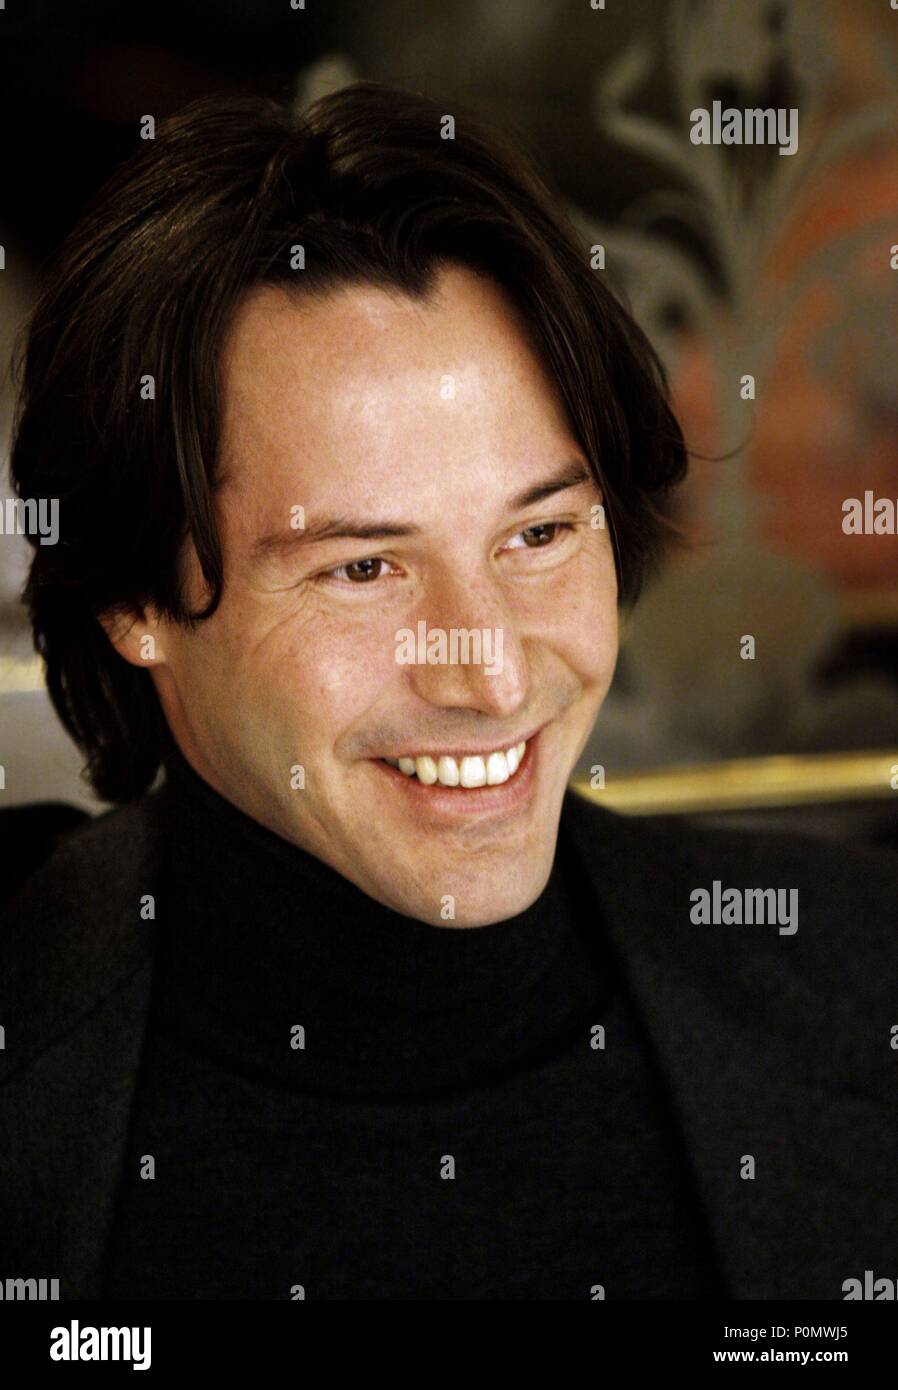 Original Film Title: SOMETHING'S GOTTA GIVE.  English Title: SOMETHING'S GOTTA GIVE.  Film Director: NANCY MEYERS.  Year: 2003.  Stars: KEANU REEVES. Credit: COLUMBIA PICTURES / Album Stock Photo